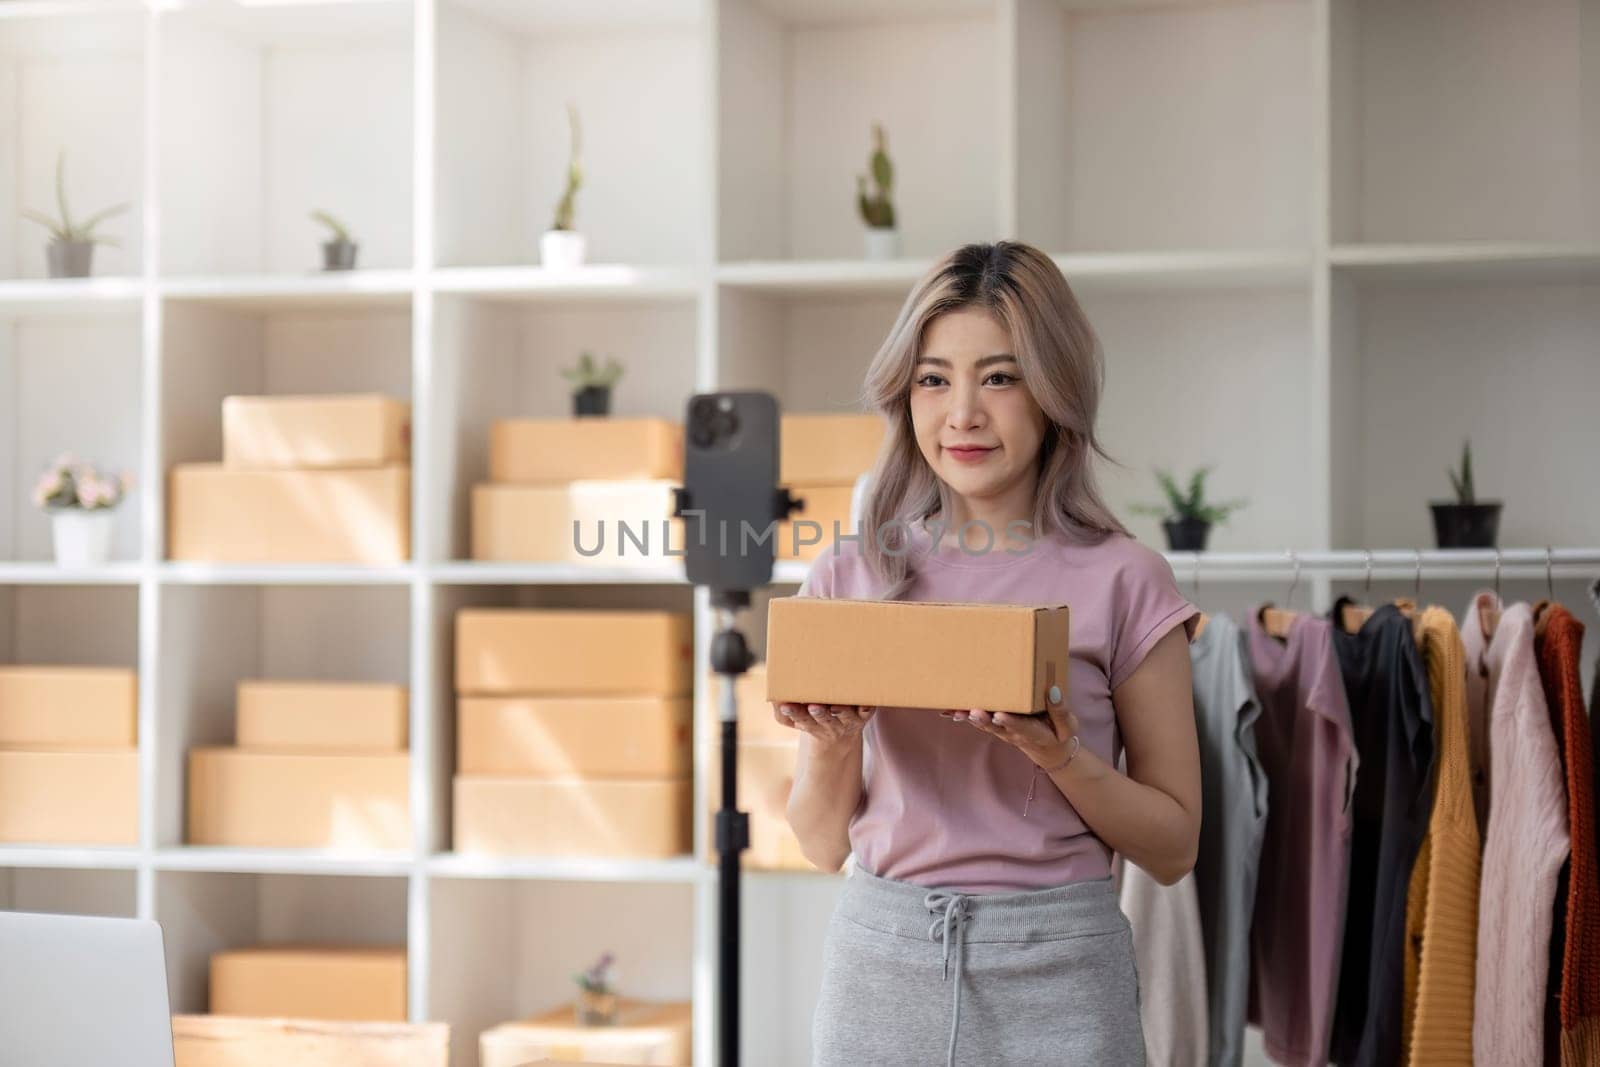 Blogger small SME business woman using mobile phone video call for sell clothes live stream selling online, show product present detail at home office, entrepreneur ecommerce.